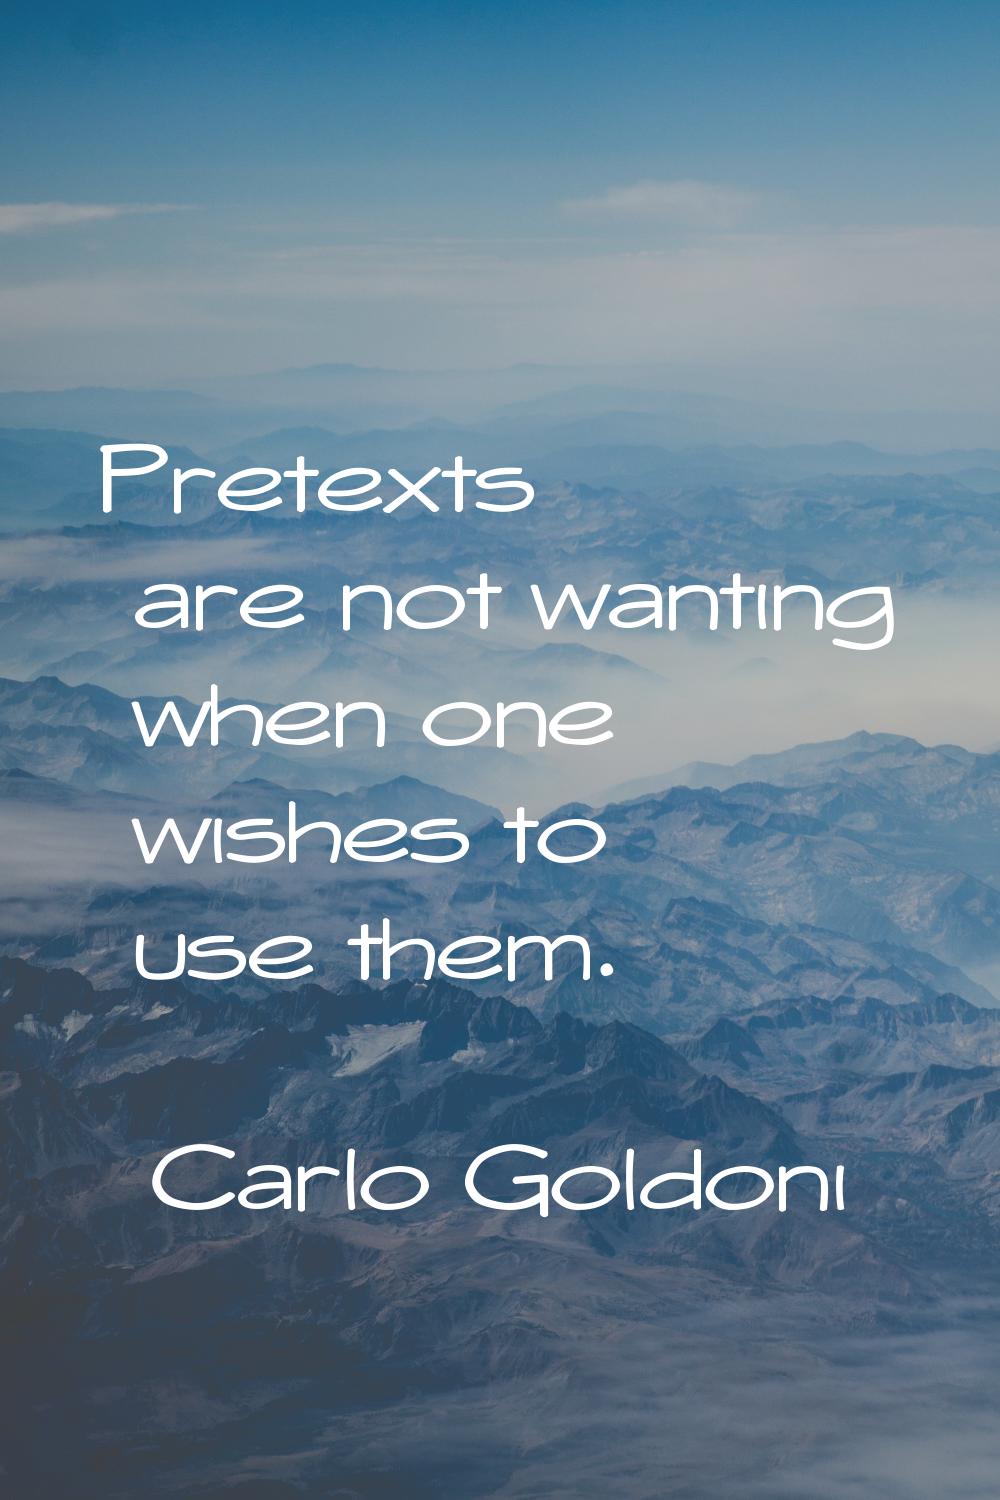 Pretexts are not wanting when one wishes to use them.